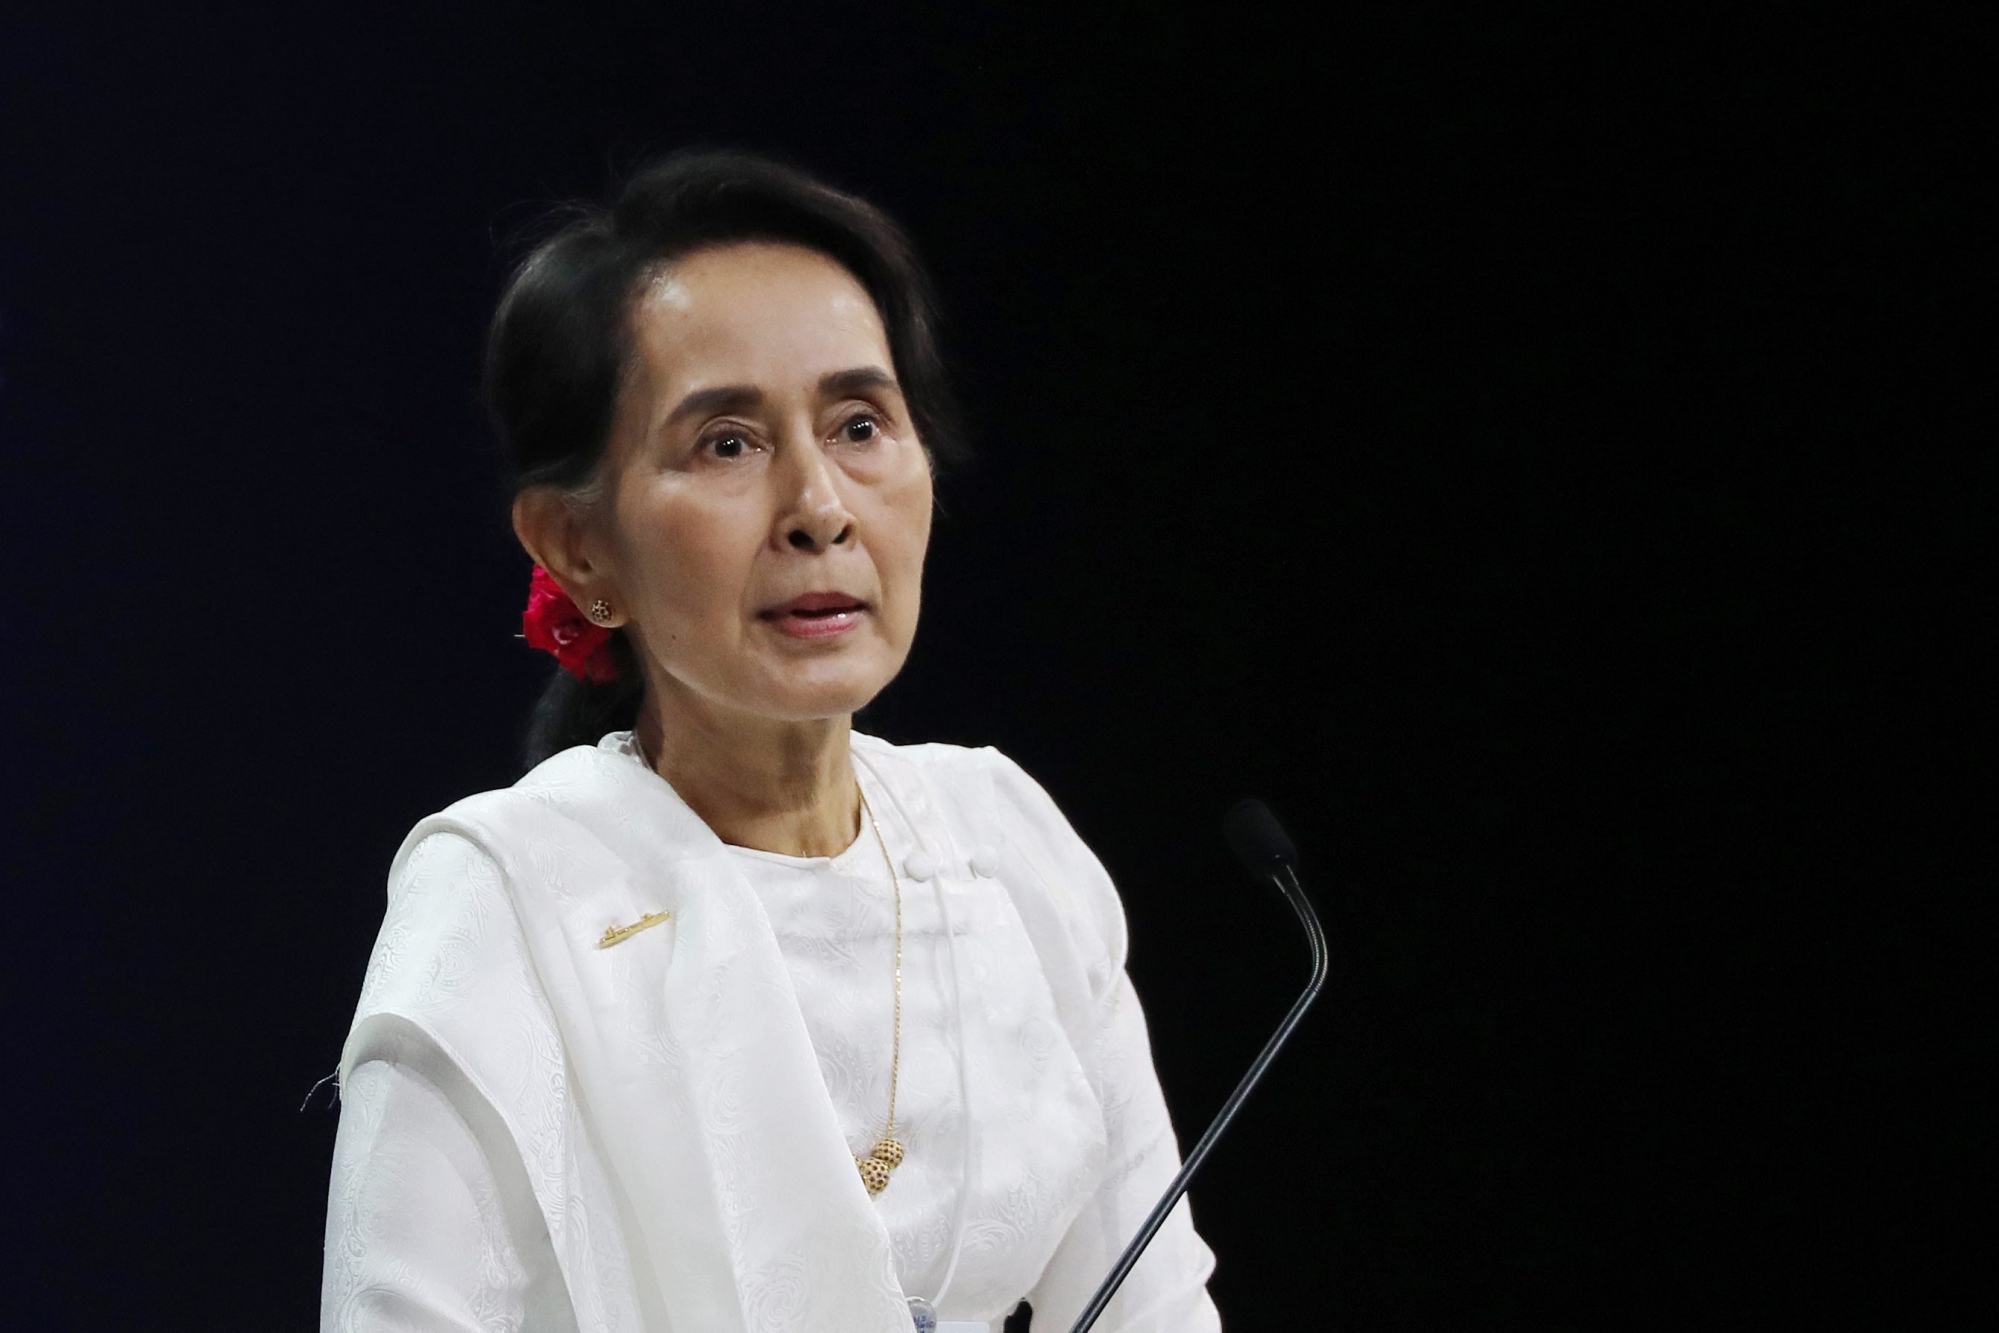 epa07016256 Myanmar's State Counsellor Aung San Suu Kyi (R) speaks during the World Economic Forum on ASEAN at the National Convention Center in Hanoi, Vietnam, 13 September 2018.  EPA/LUONG THAI LINH VIETNAM WORLD ECONOMIC FORUM ASEAN 2018